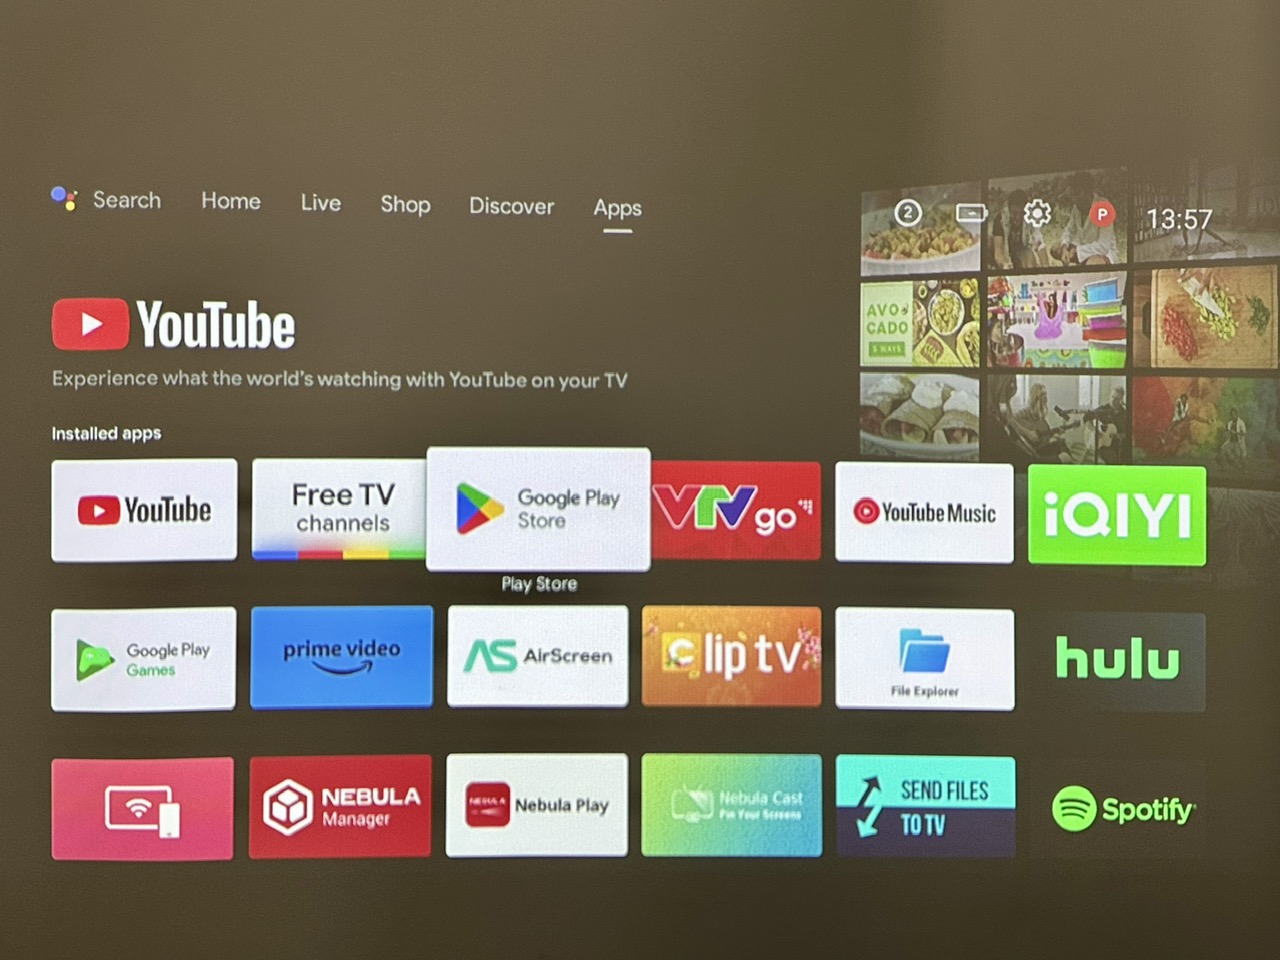 google play store is highlighted on the nebula projector